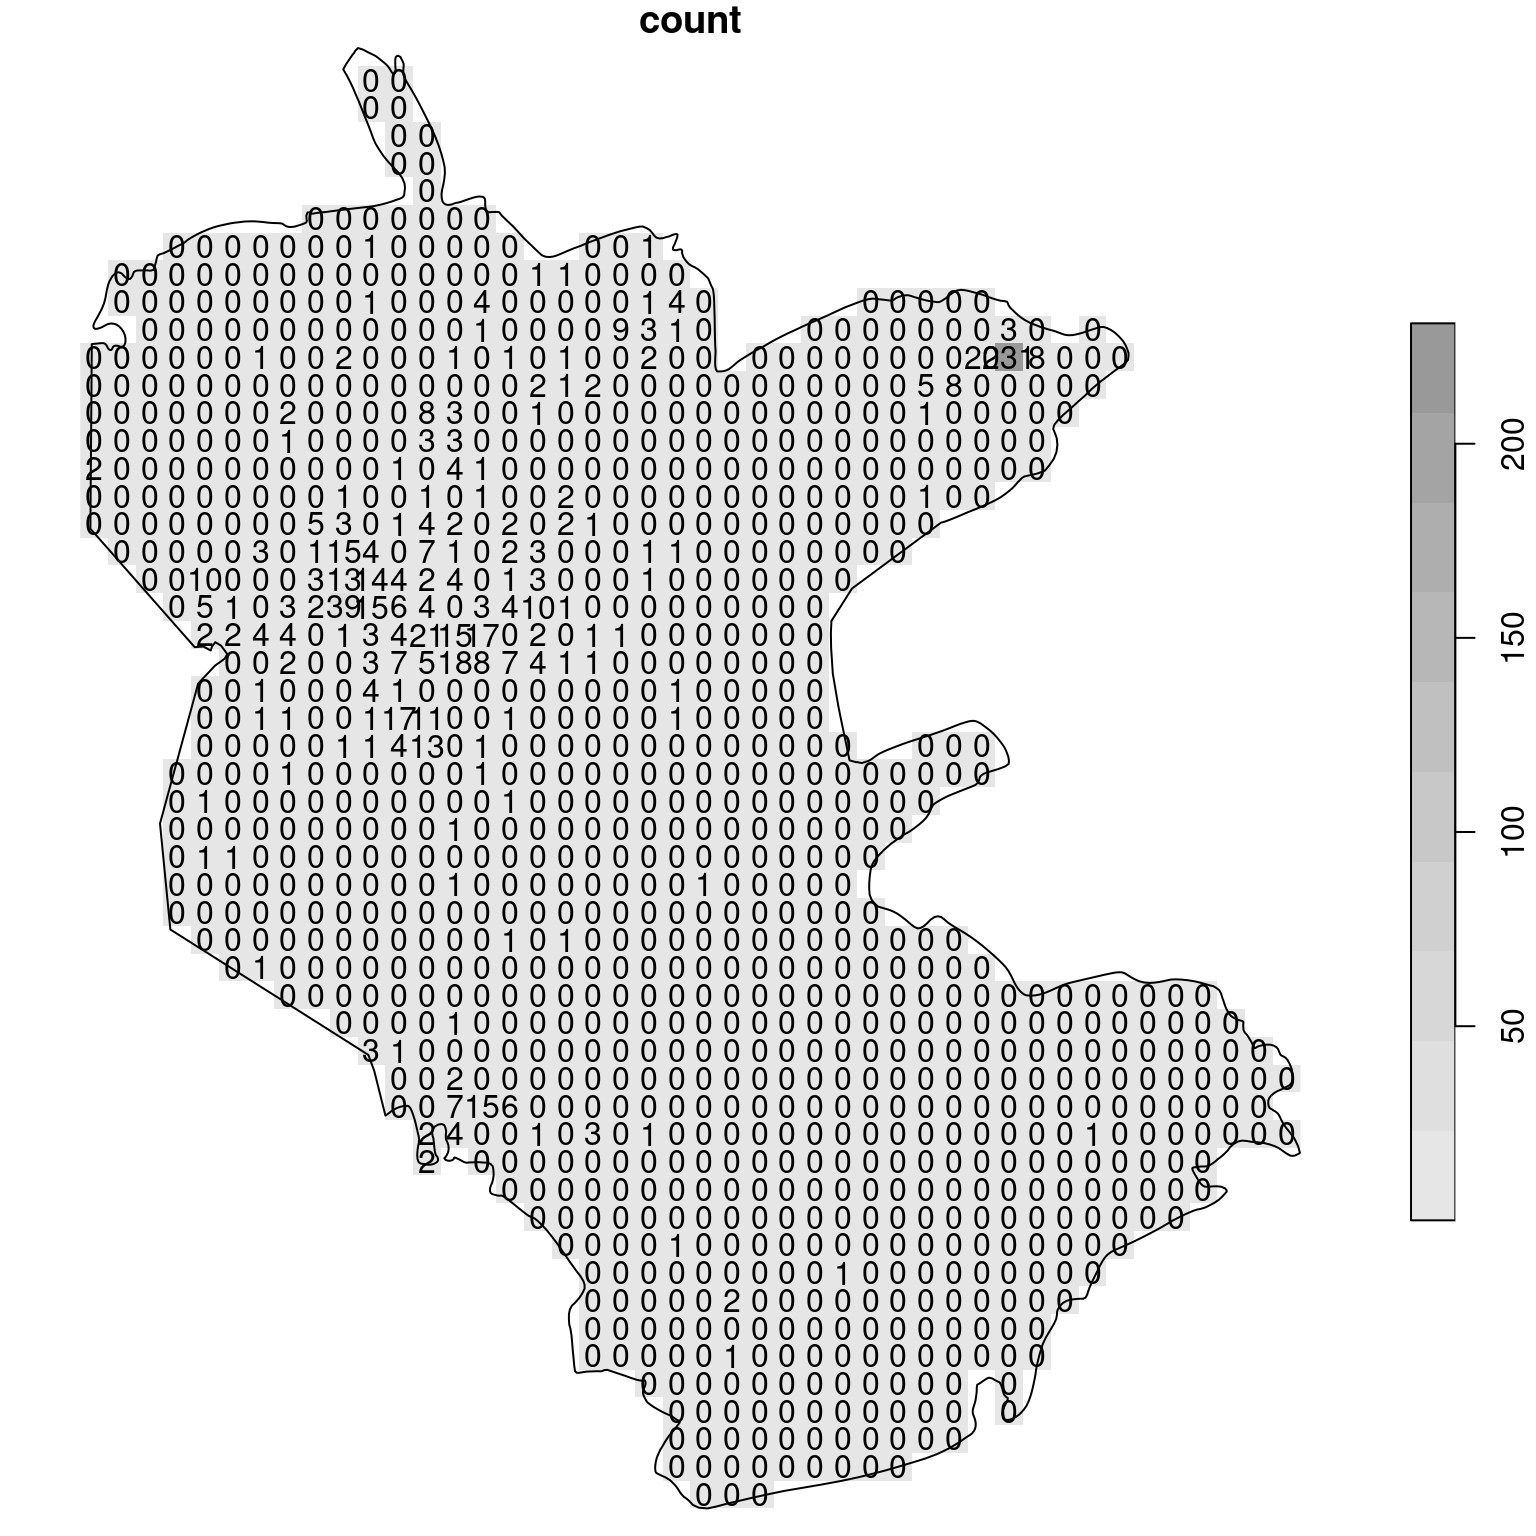 Density (observations per pixel) of rare plants in the nature reserve